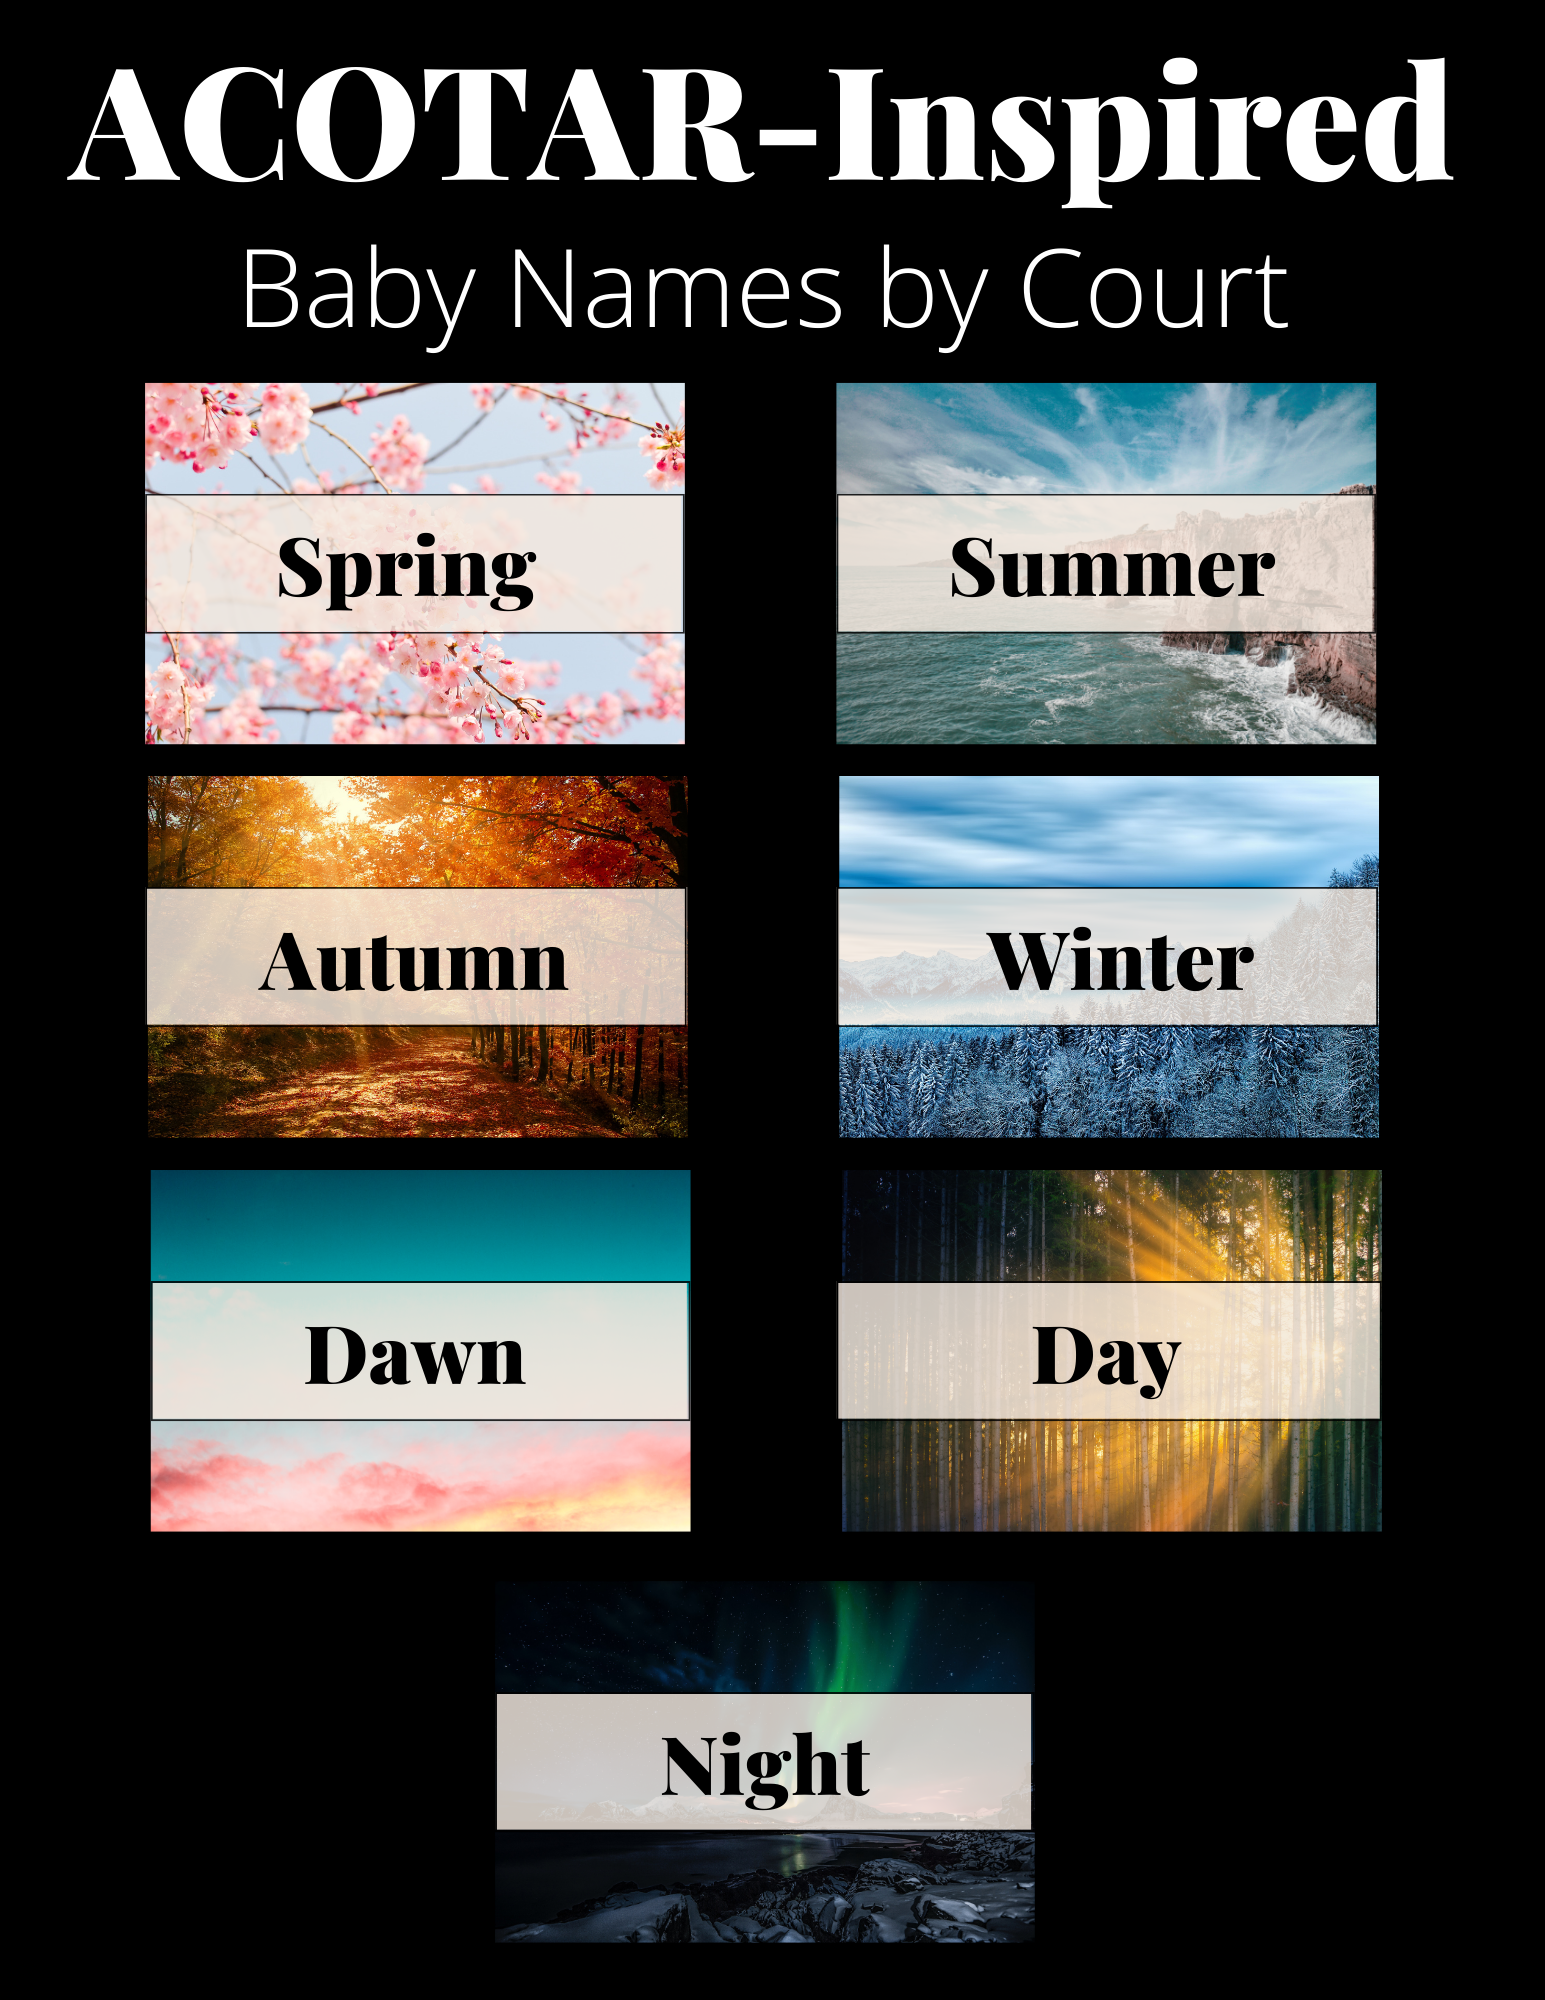 ACOTAR-Inspired Baby Names by Court